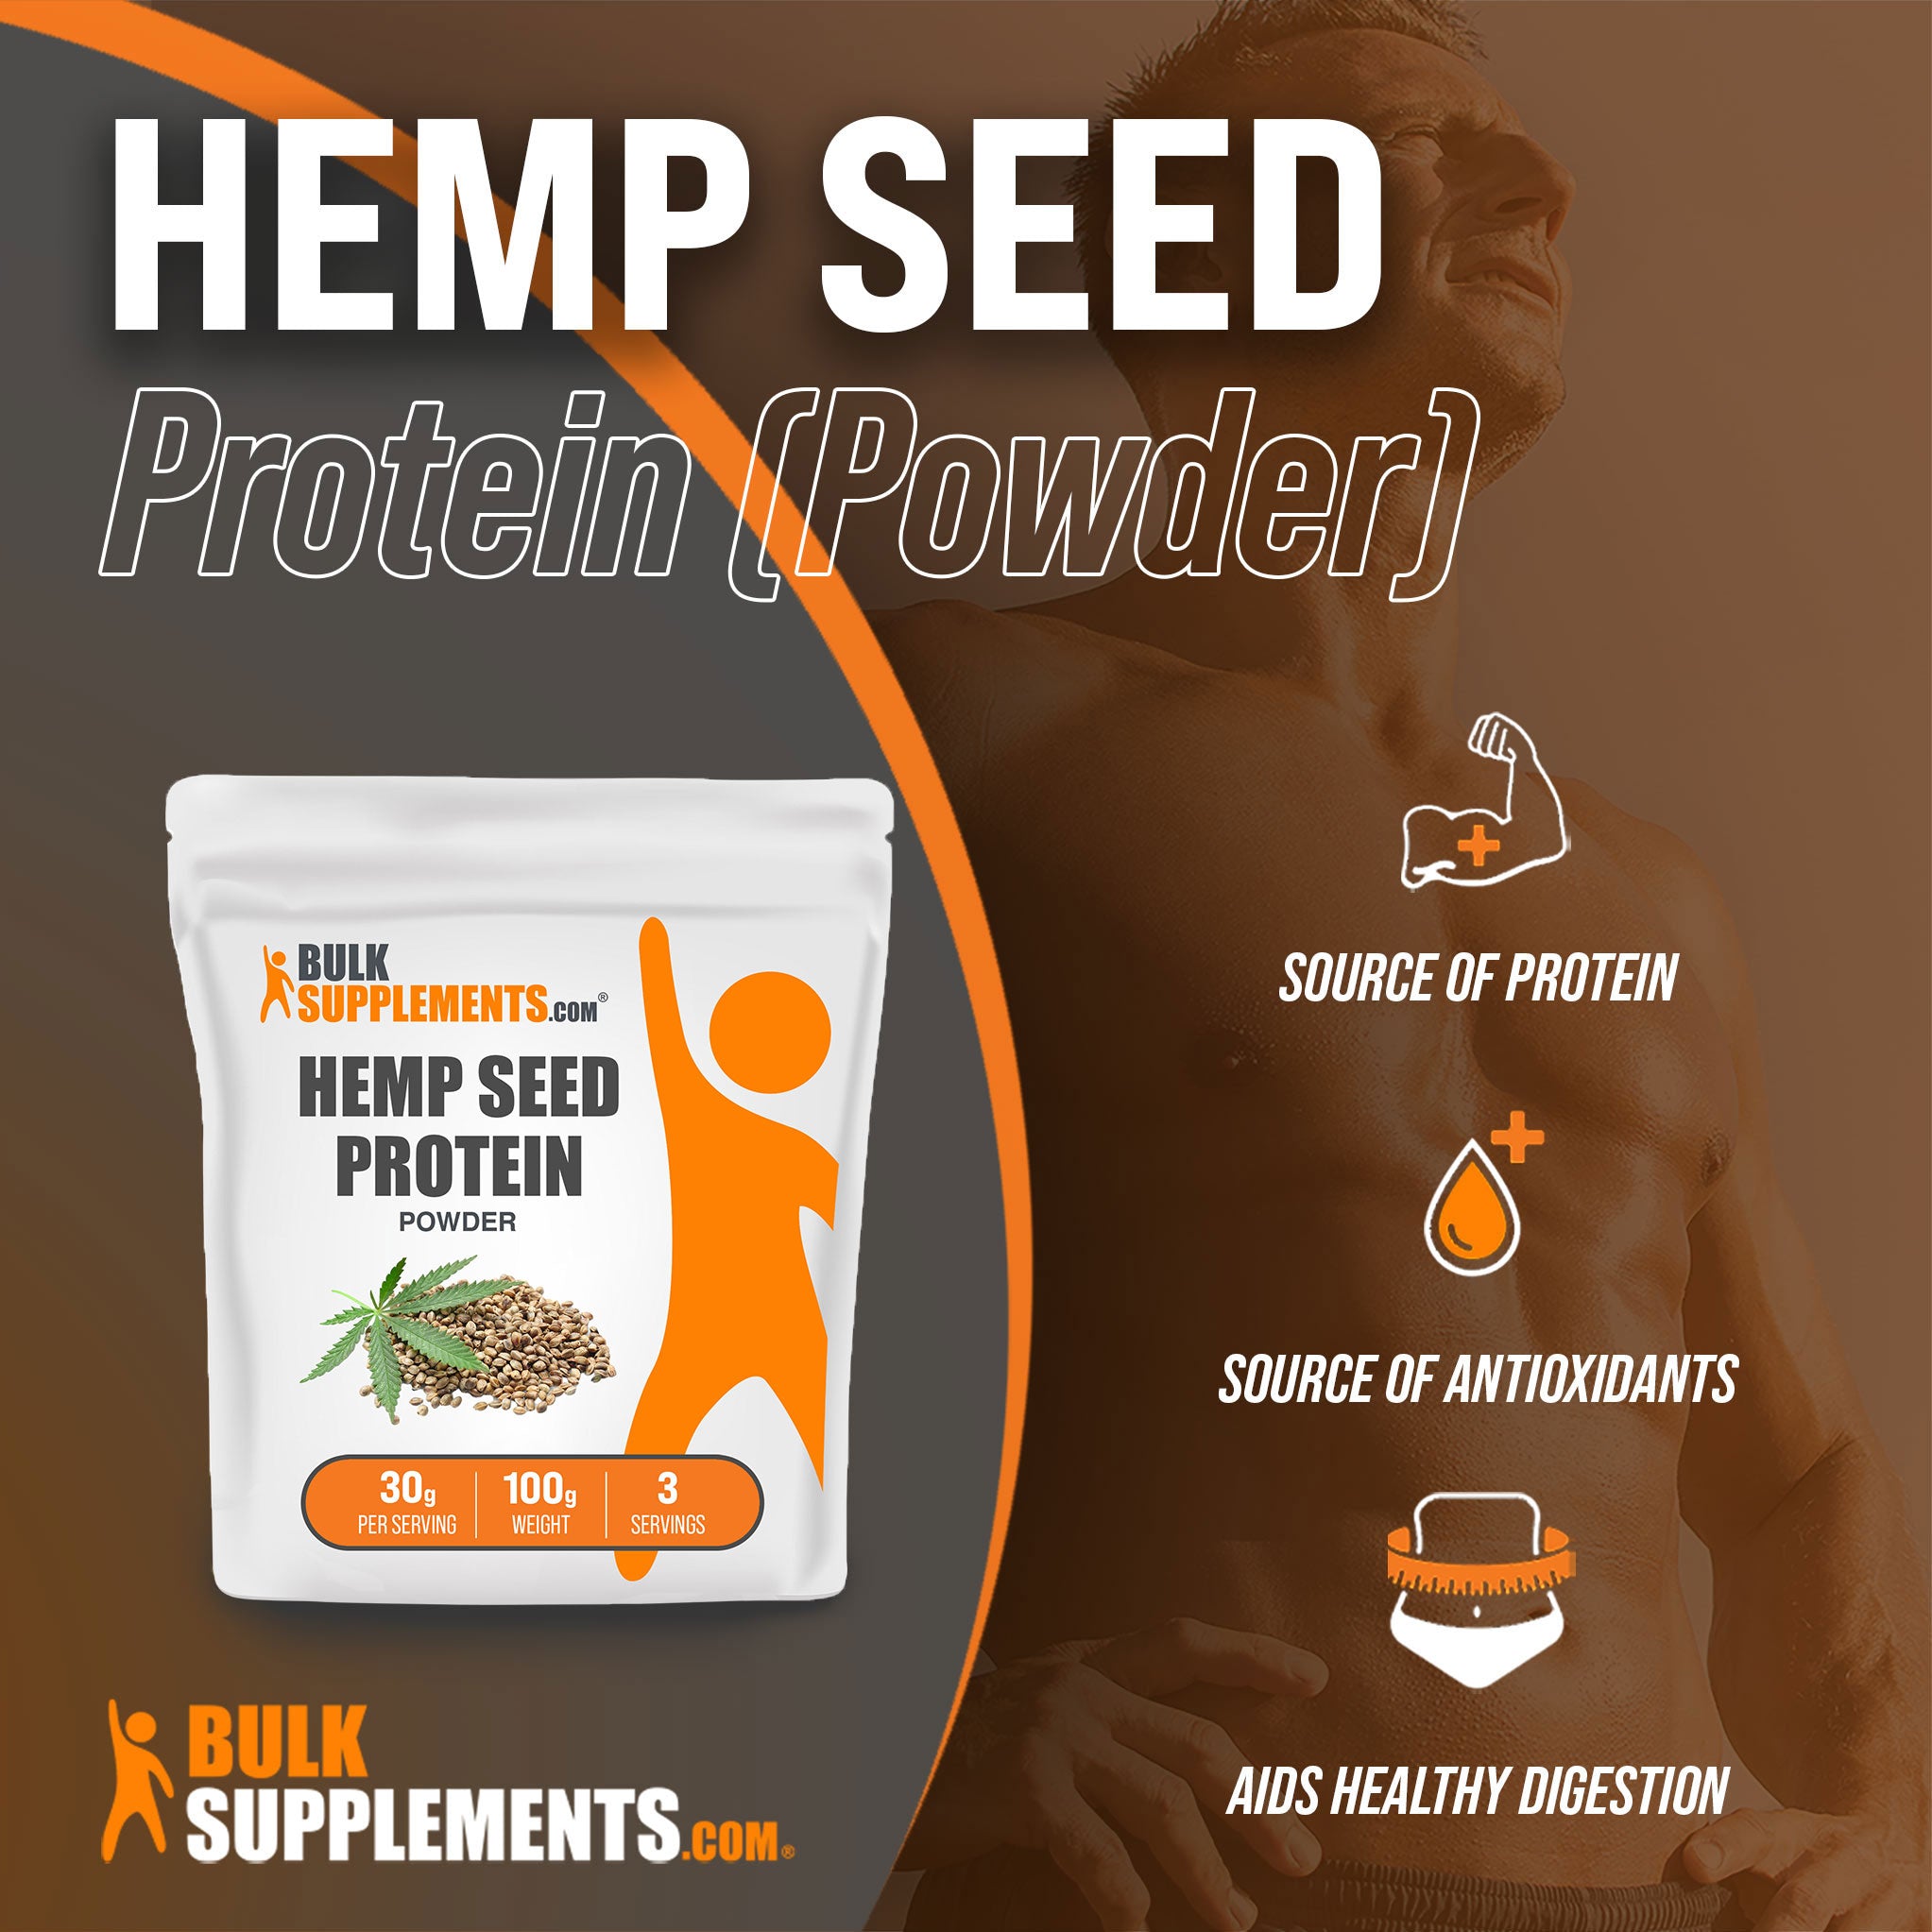 Benefits of Hemp Seed Protein Powder; source of protein, source of antioxidants, aids healthy digestion